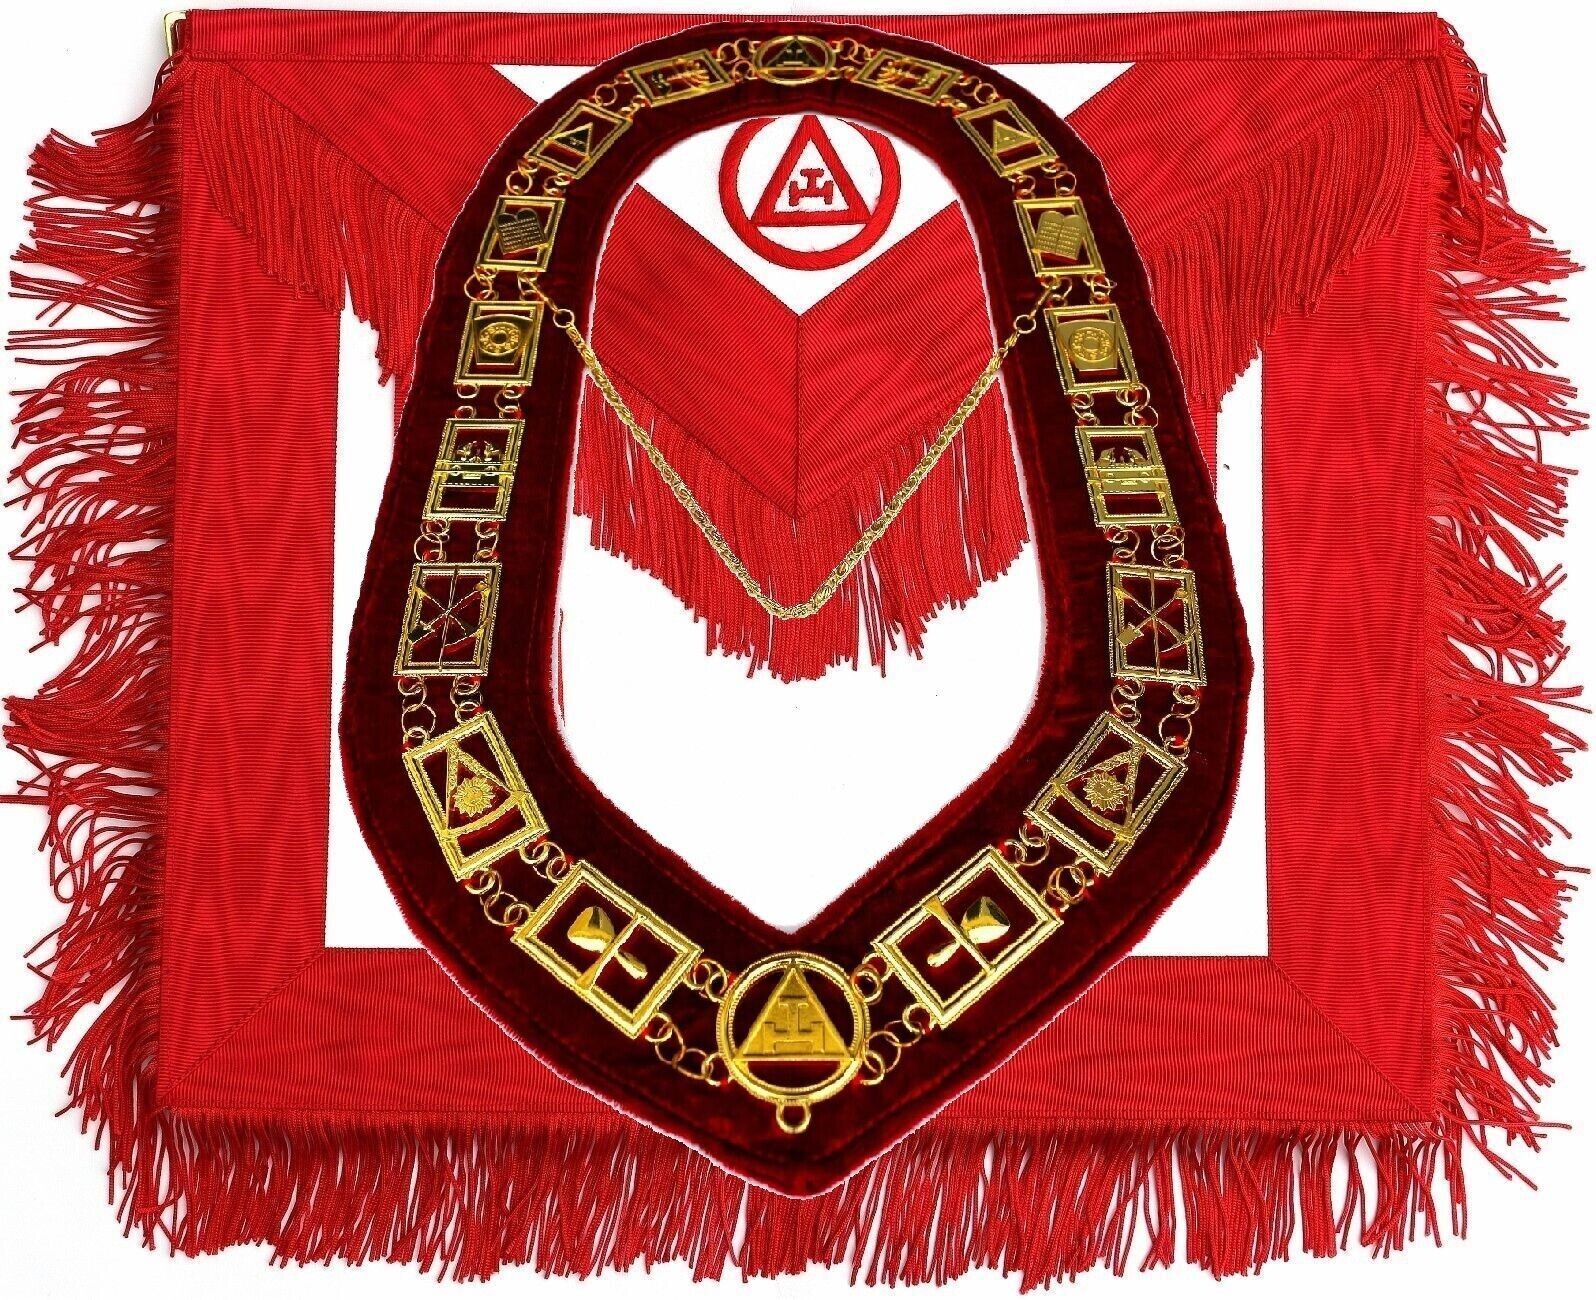 MASONIC REGALIA ROYAL ARCH MARK MASTER APRON WITH CHAIN COLLAR RED AND GOLDEN